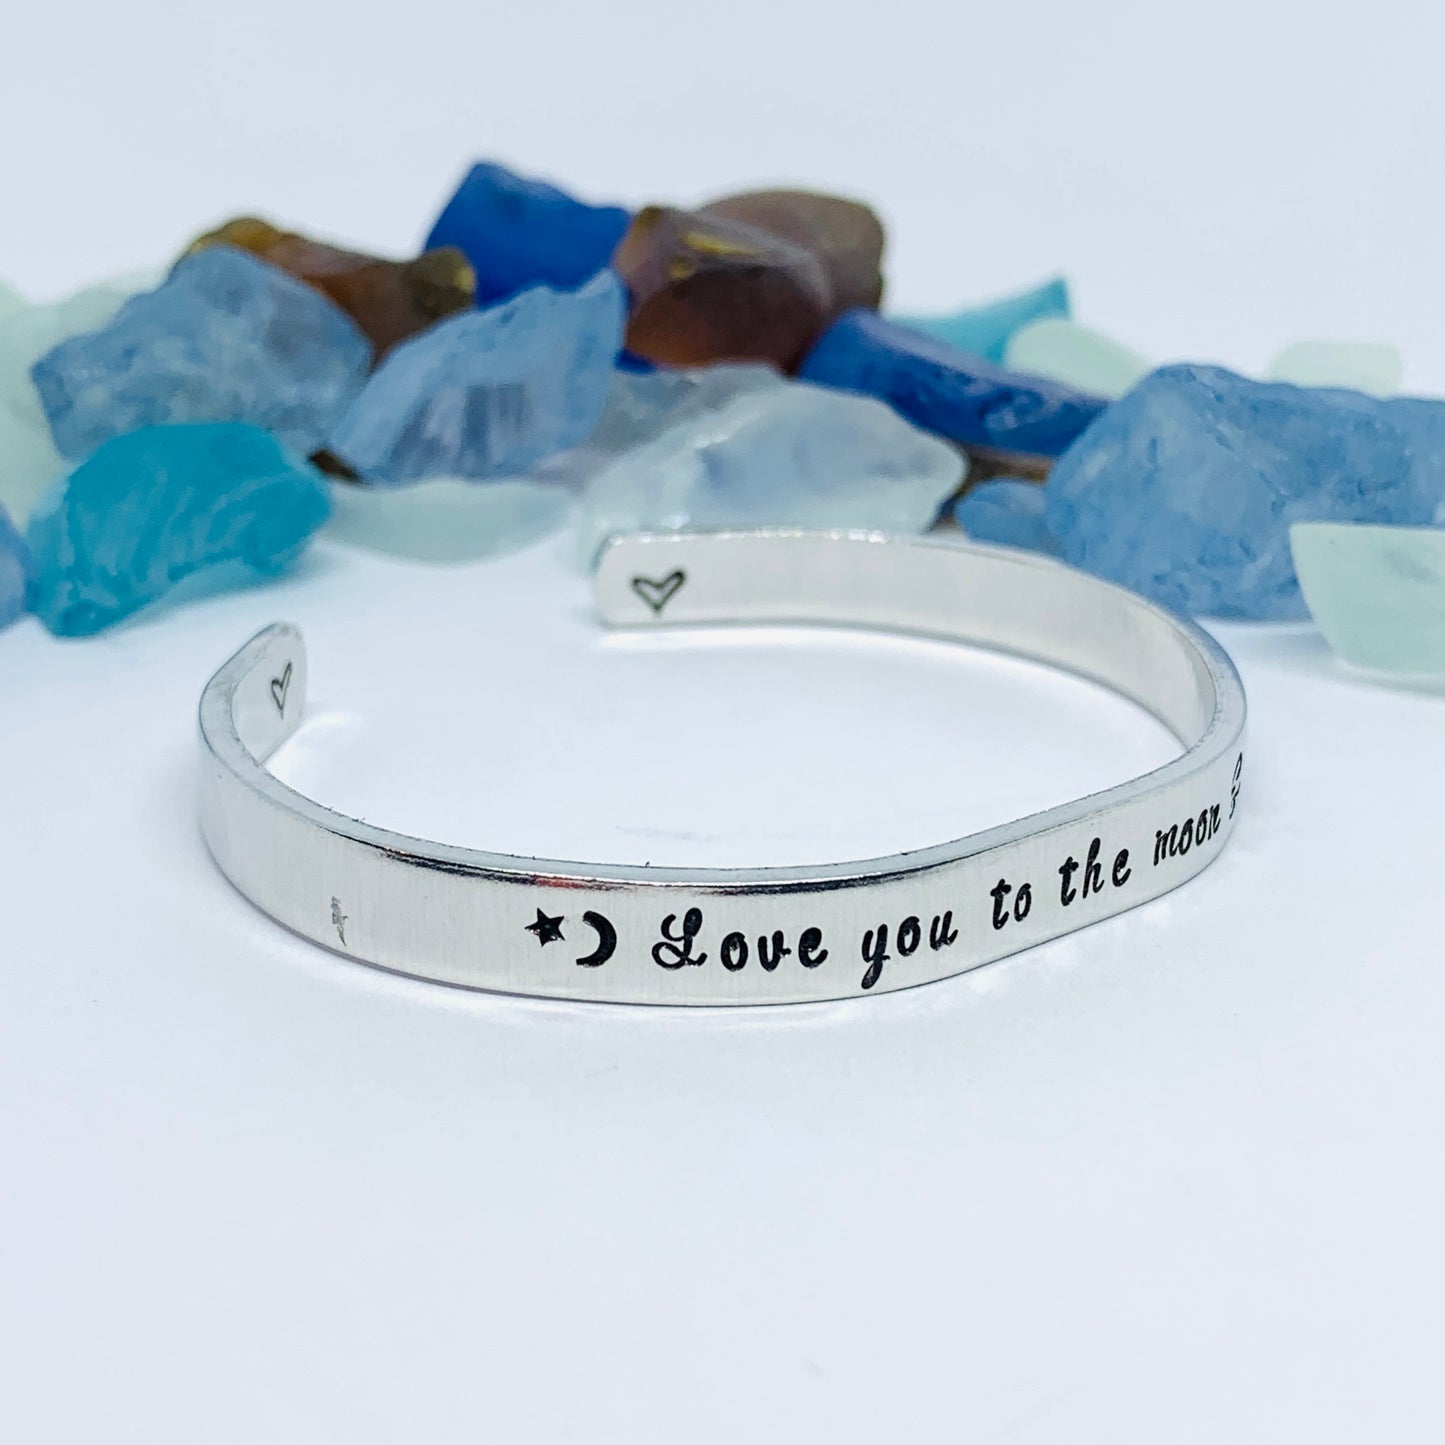 Love you to the moon & back - Hand Stamped Metal Cuff Bracelet | Love Cuff | Gift for Her | Love Script Bracelet | Quote Bracelet